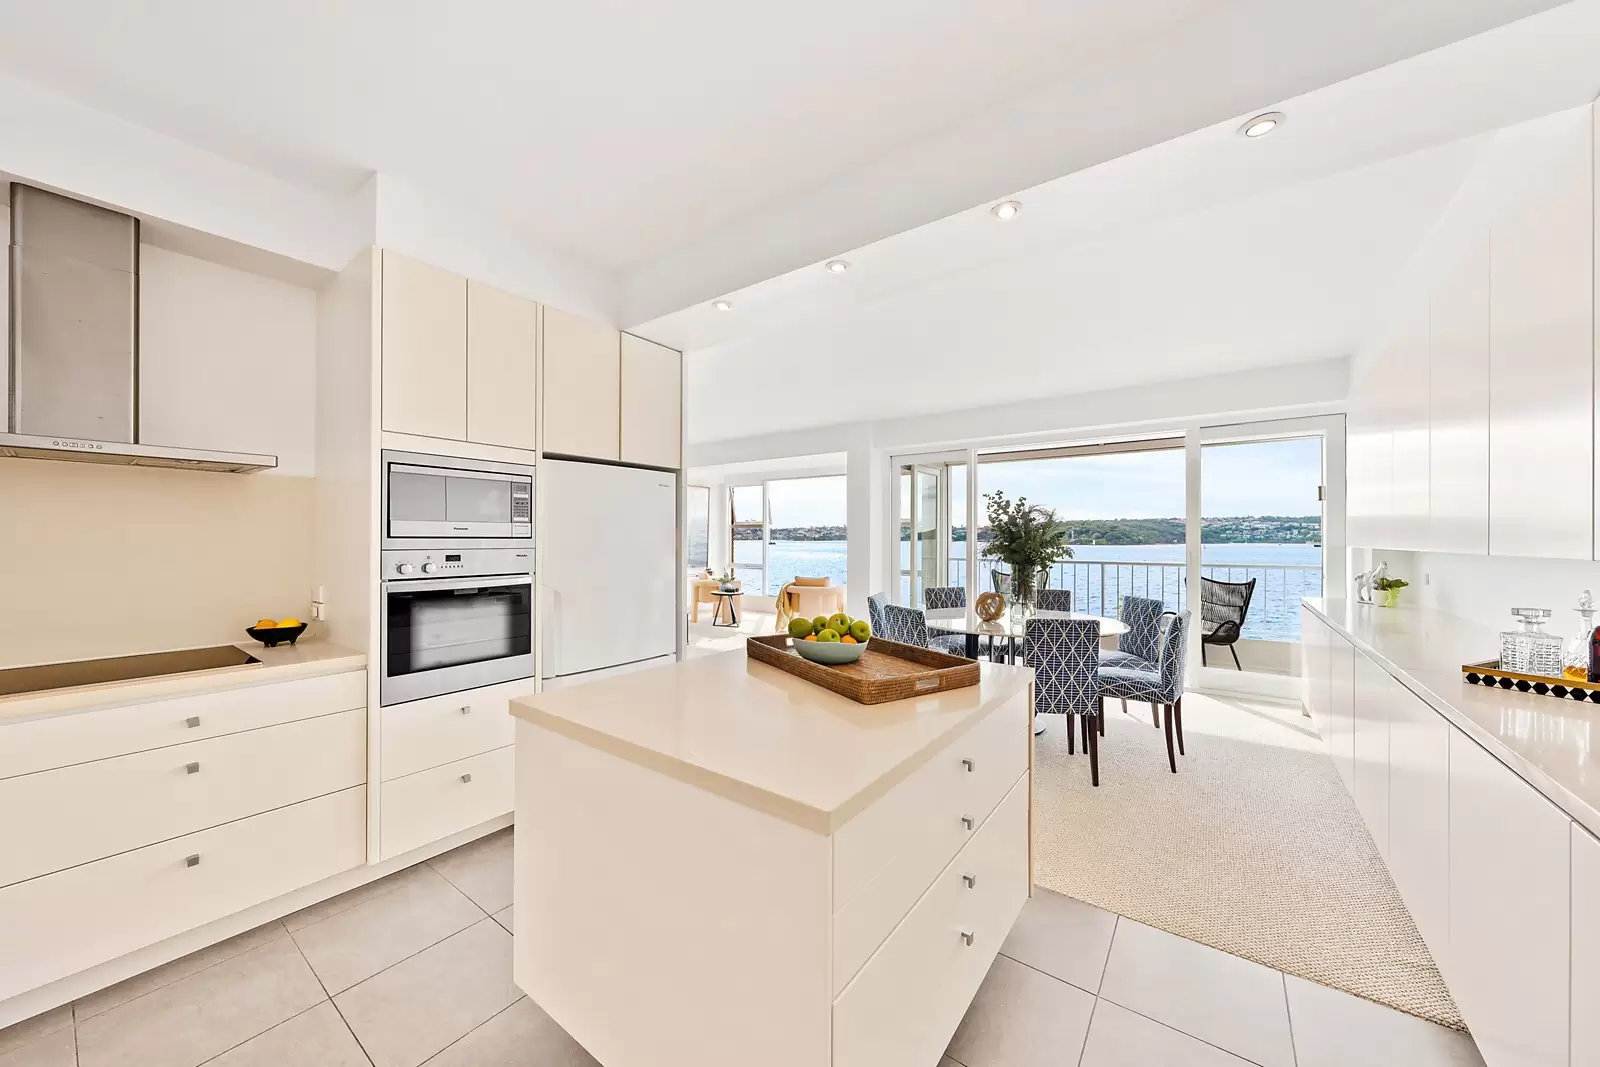 Photo #10: 2/126 Wolseley Road, Point Piper - Sold by Sydney Sotheby's International Realty